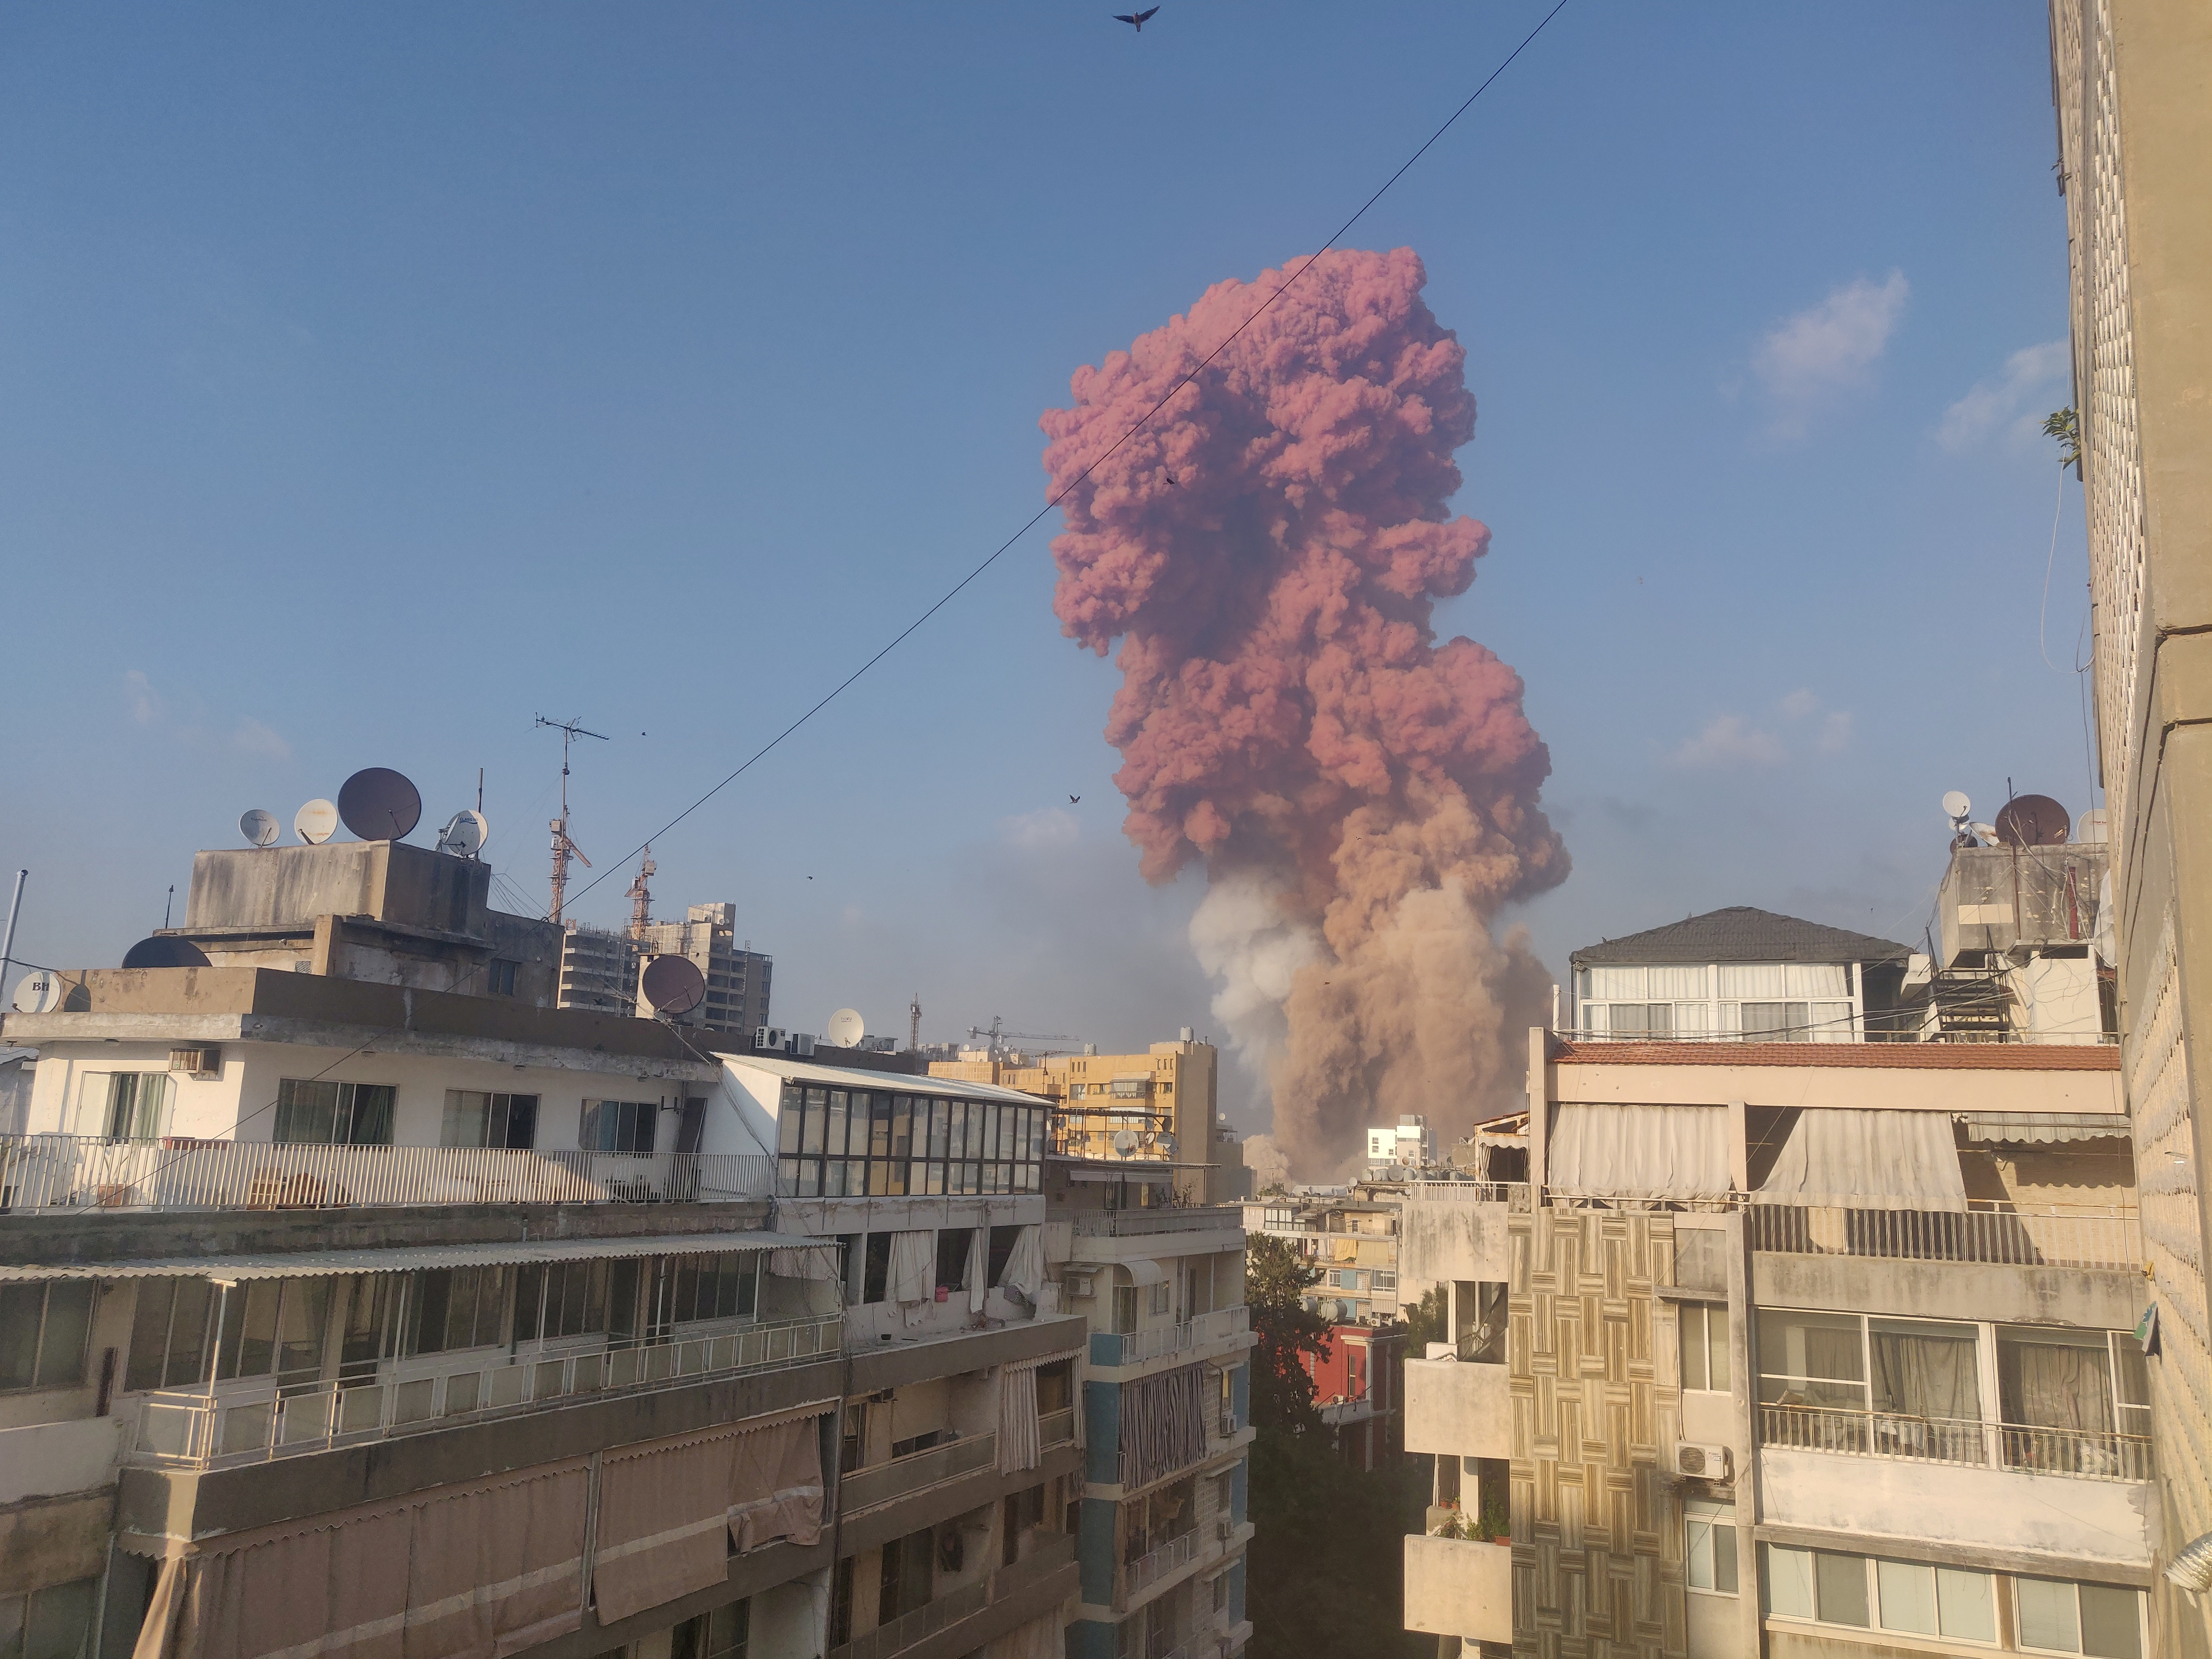 Smoke is seen after an explosion in Beirut, Lebanon August 4, 2020, in this picture obtained from social media. Photo: Talal Traboulsi/via Reuters